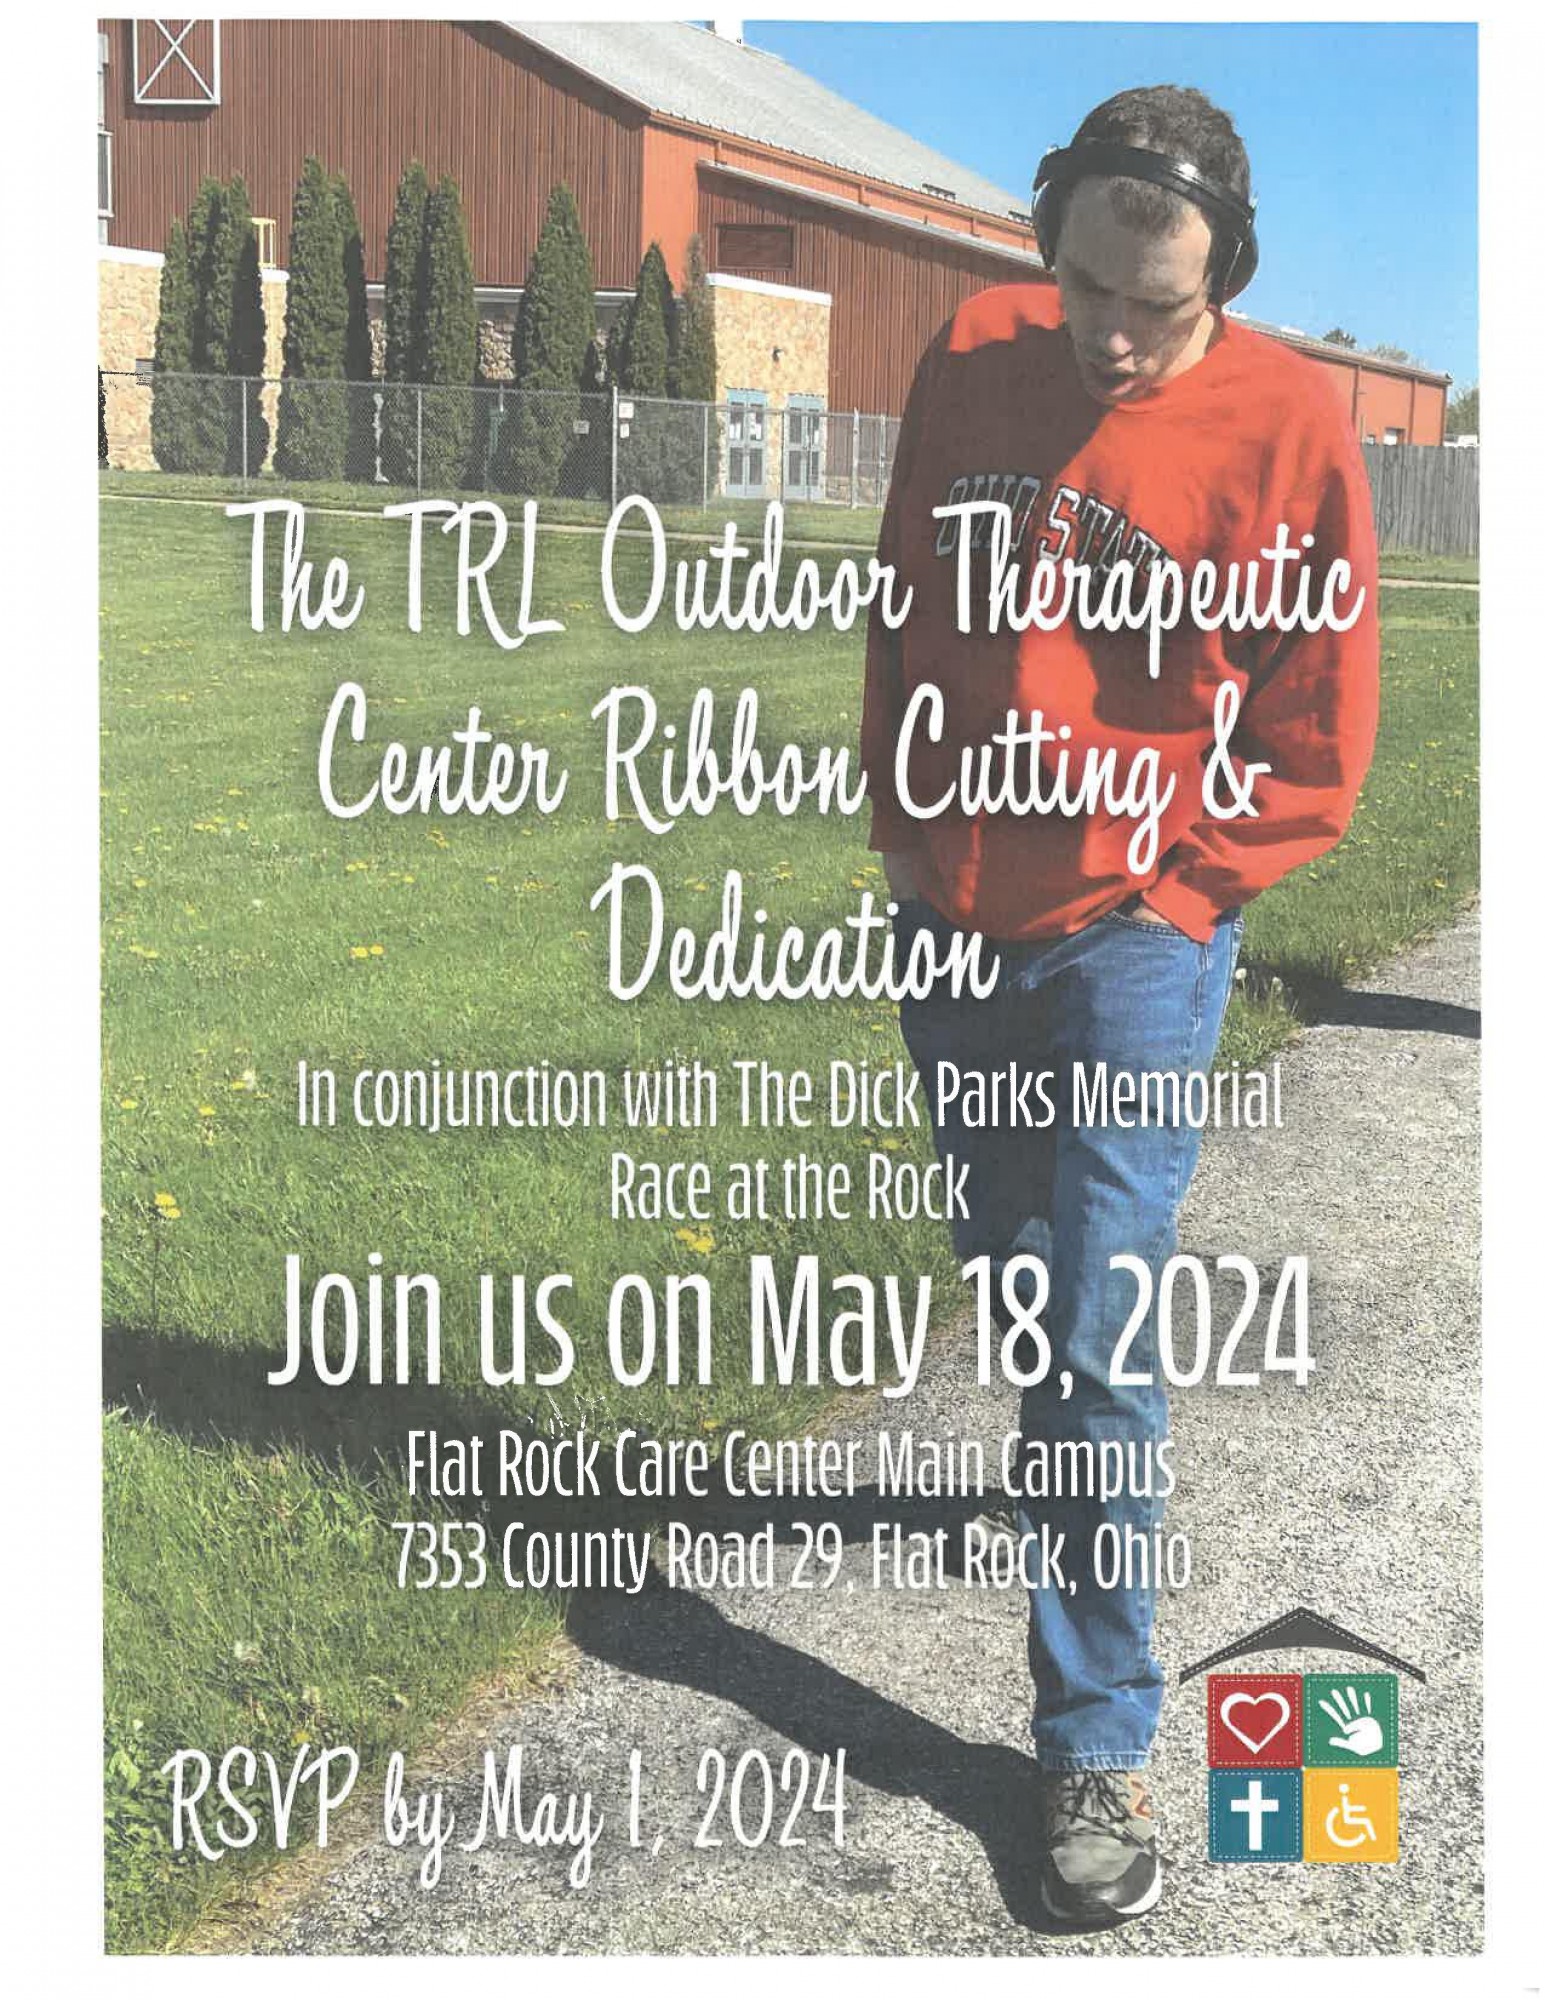 TRL Outdoor Therapeutic Center Ribbon Cutting & Dedication